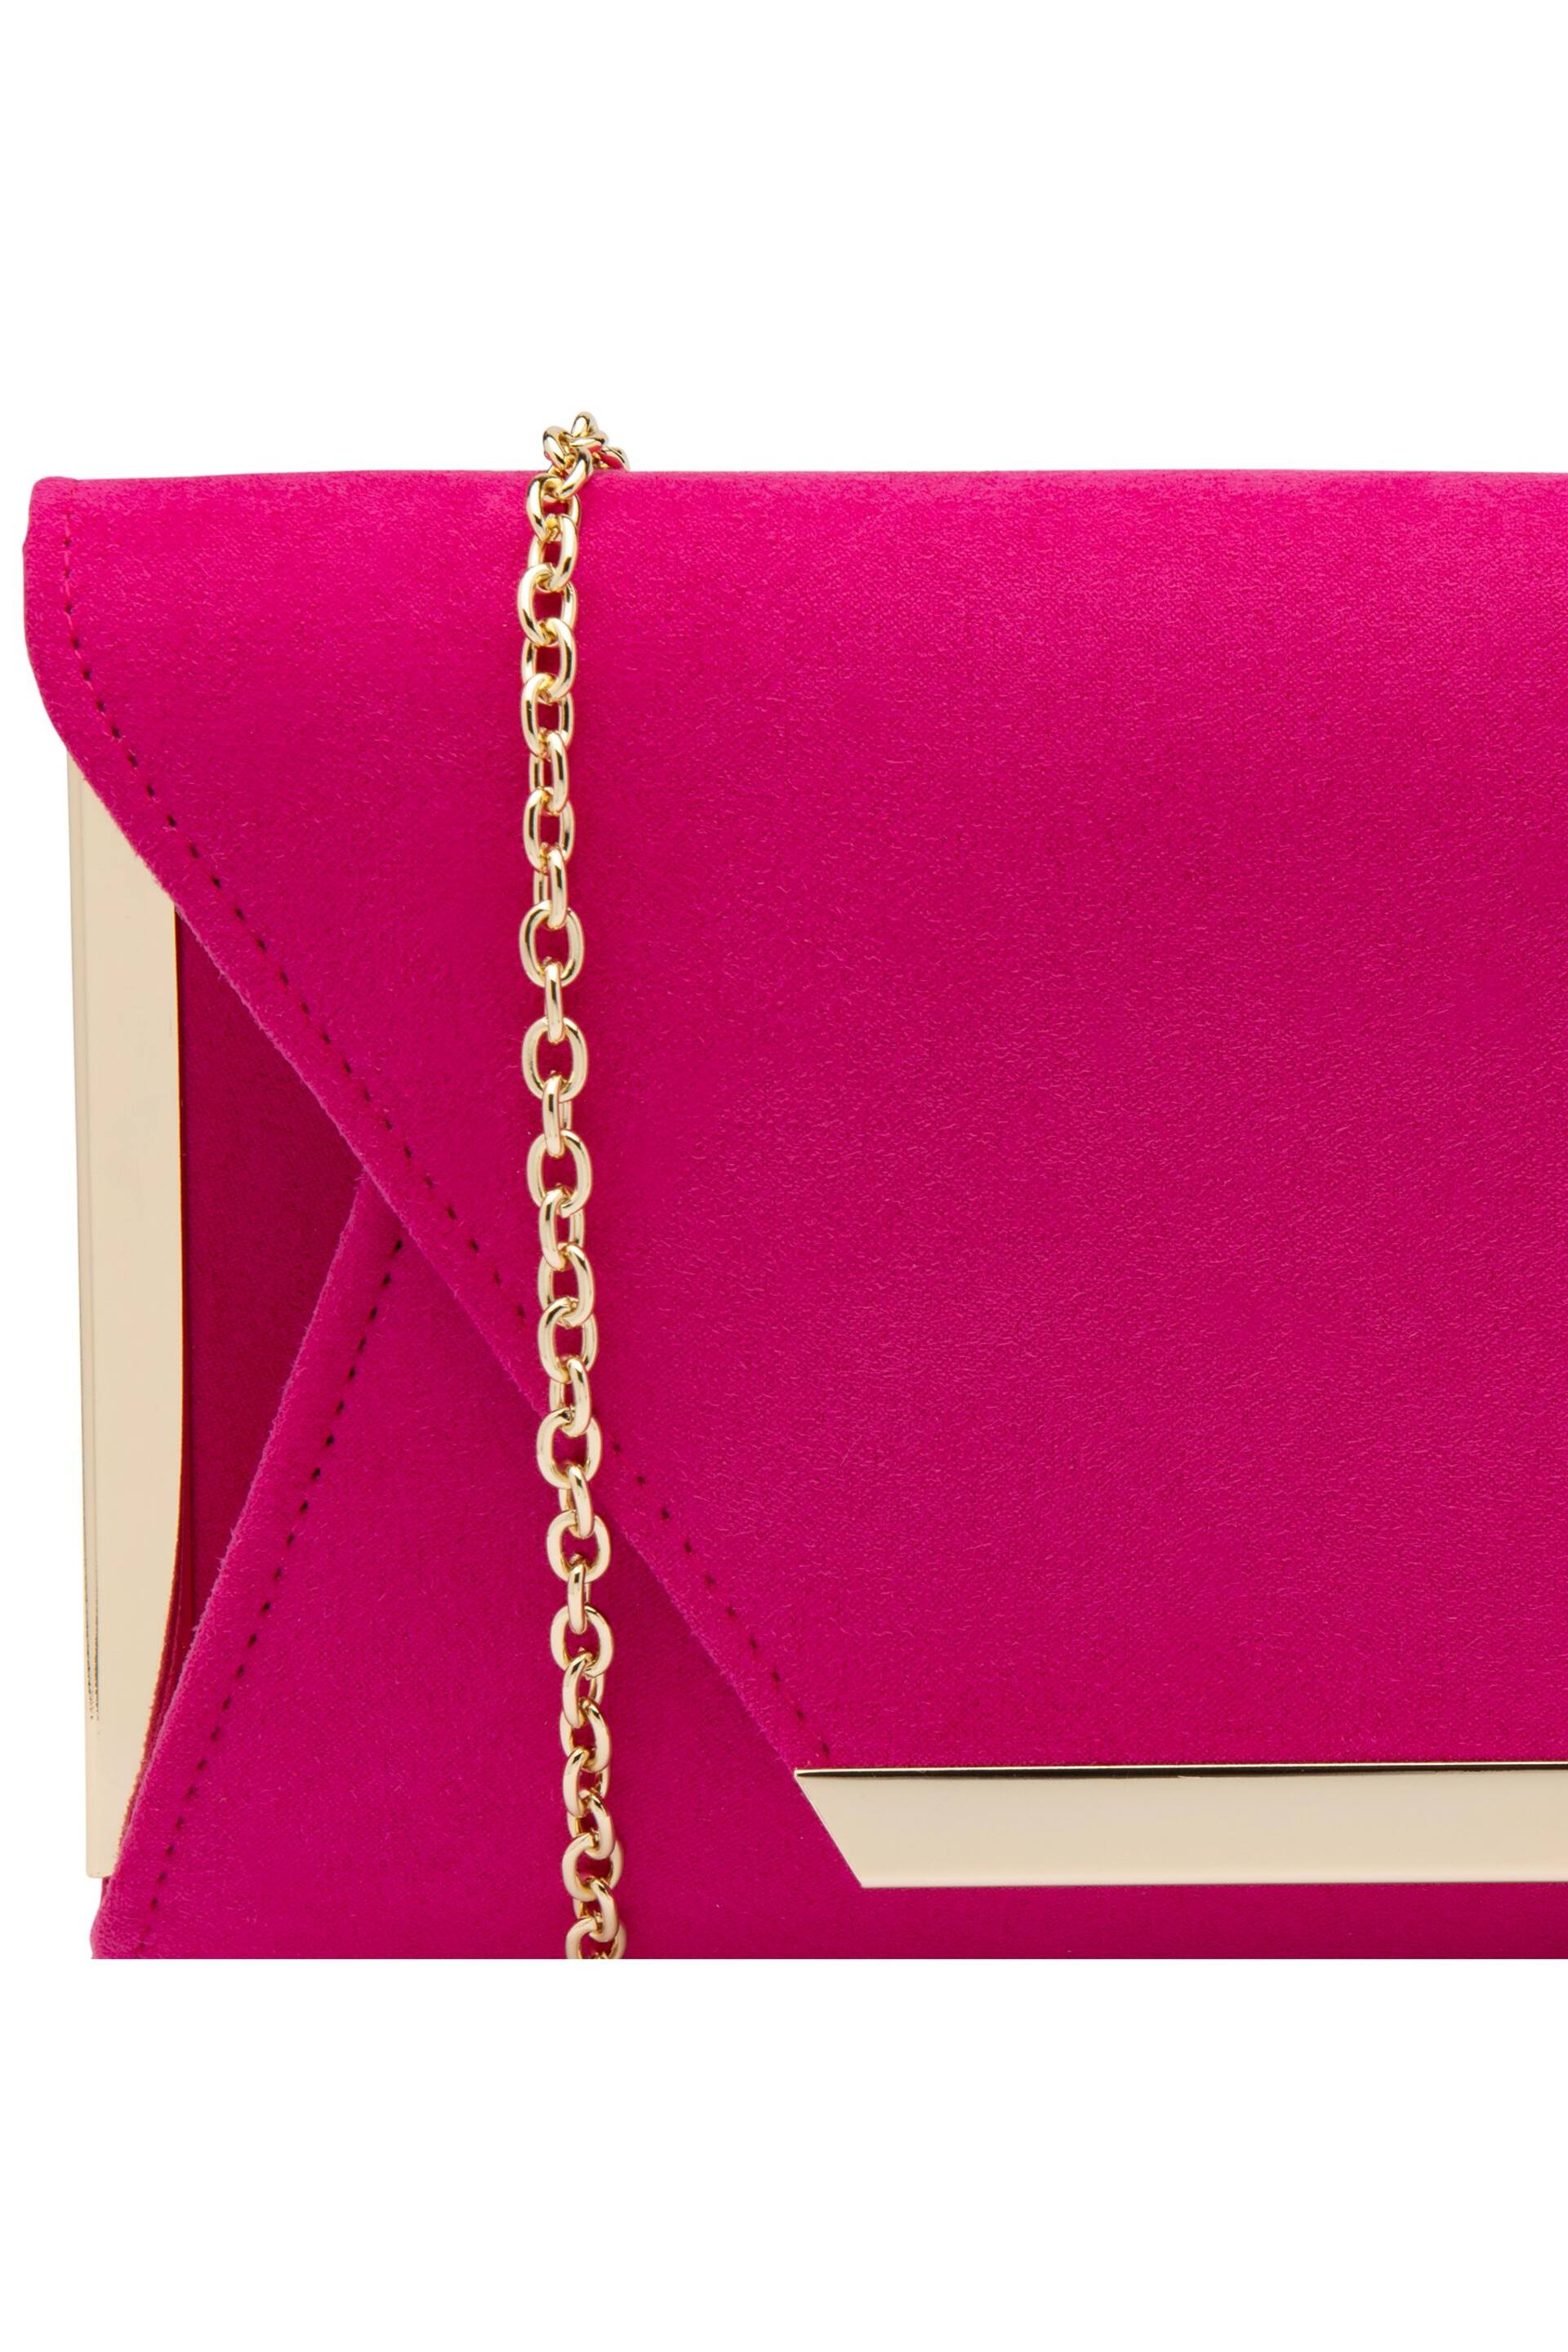 Lotus Pink Clutch Bag With Chain - Image 3 of 4